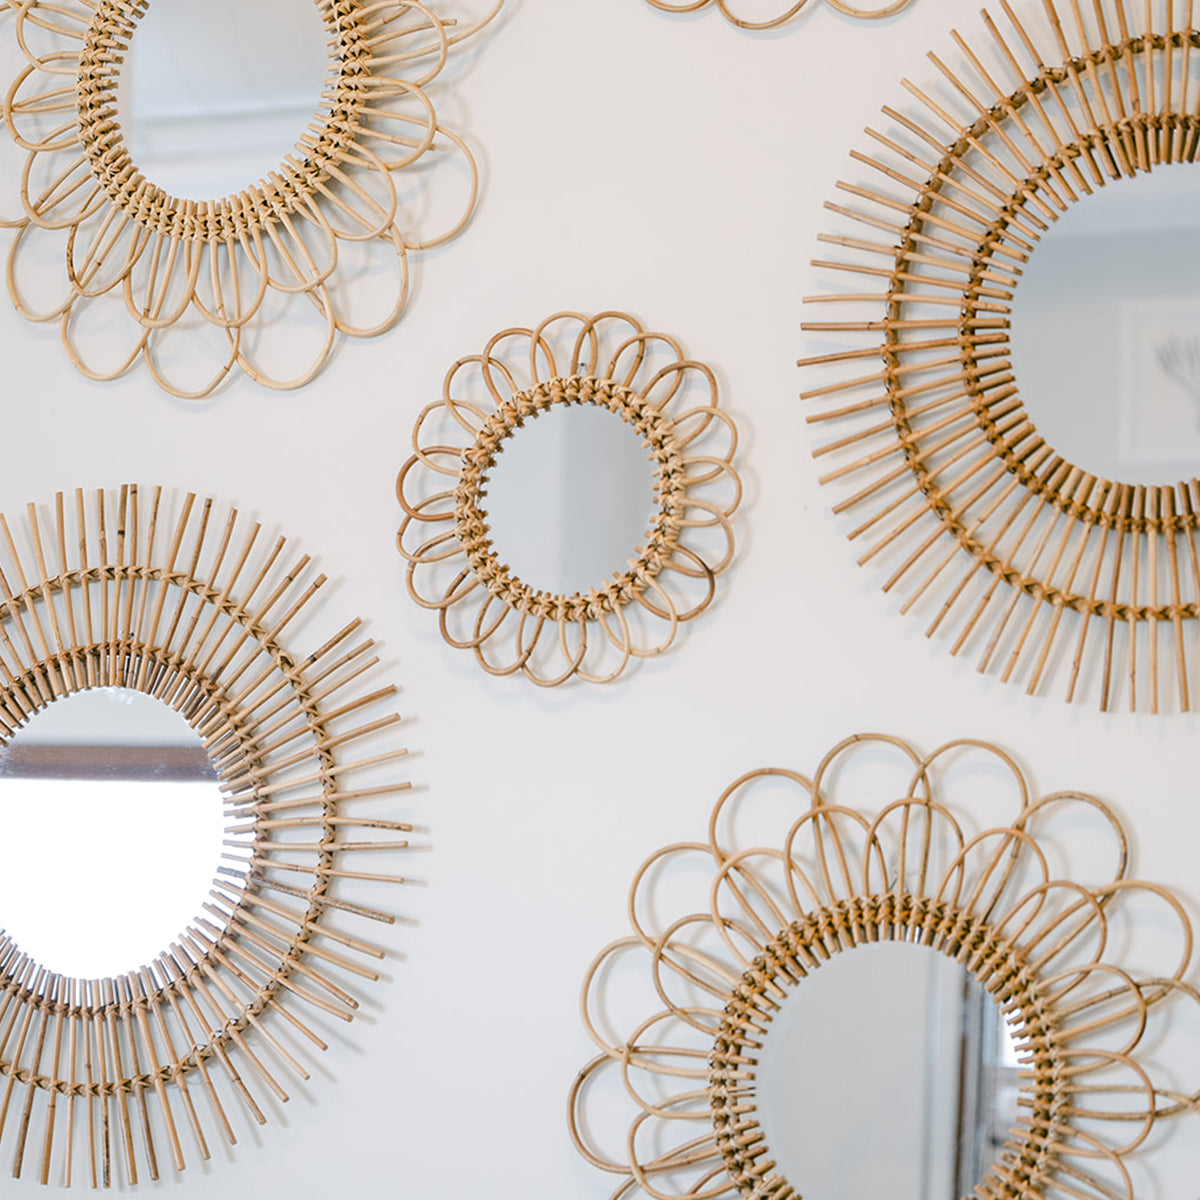 Waterleaf home featured mirrors and wall decor.